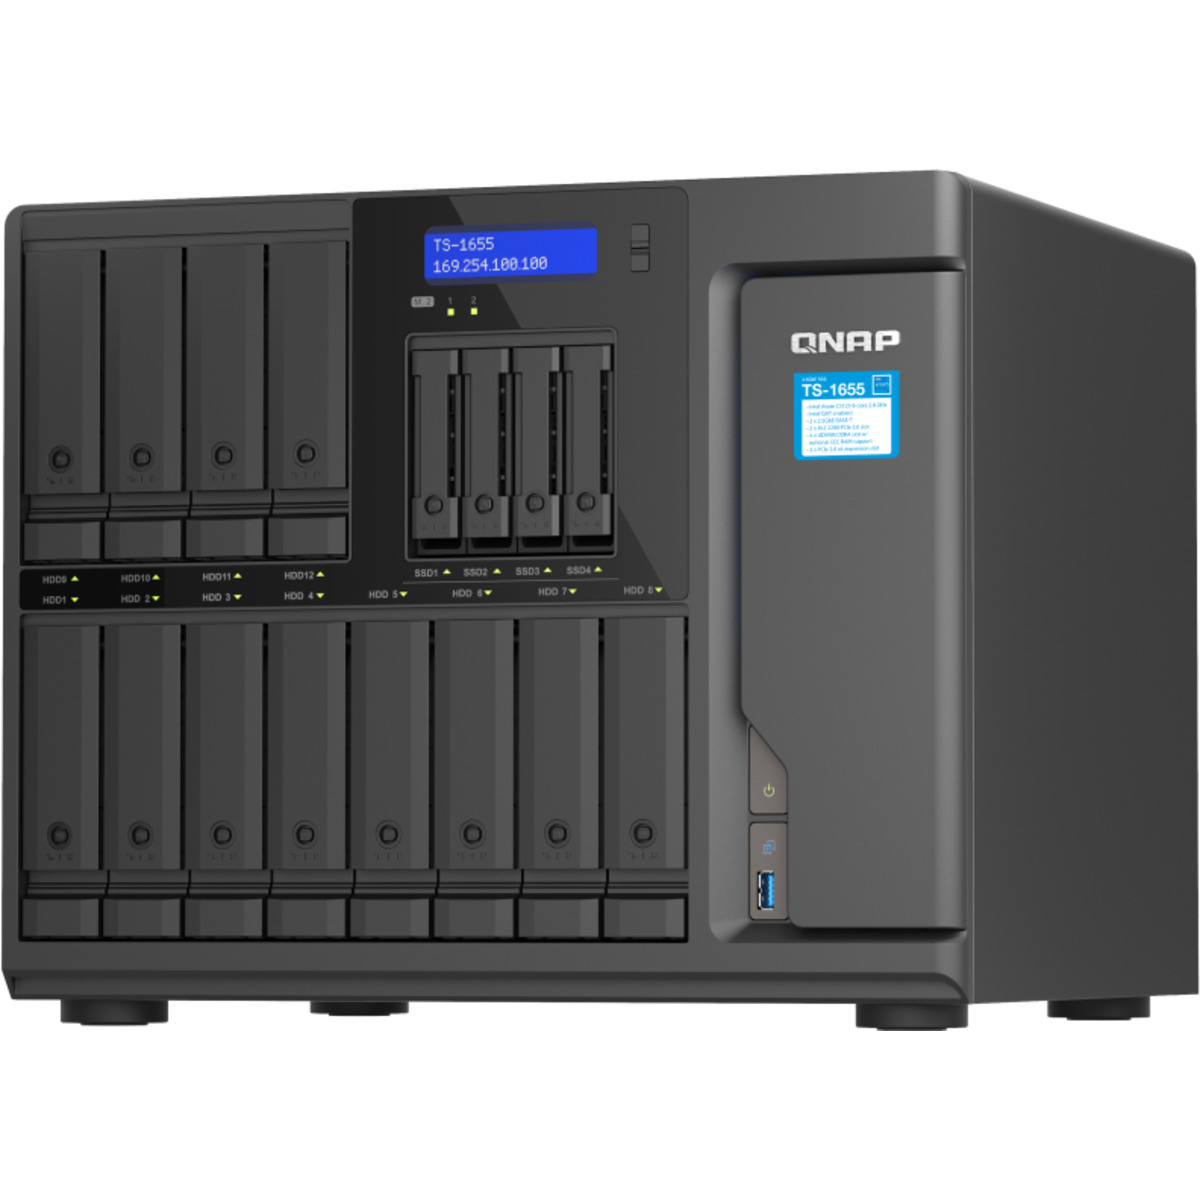 QNAP TS-1655 7tb 12+4-Bay Desktop Multimedia / Power User / Business NAS - Network Attached Storage Device 7x1tb Western Digital Red SA500 WDS100T1R0A 2.5 560/530MB/s SATA 6Gb/s SSD NAS Class Drives Installed - Burn-In Tested - FREE RAM UPGRADE TS-1655